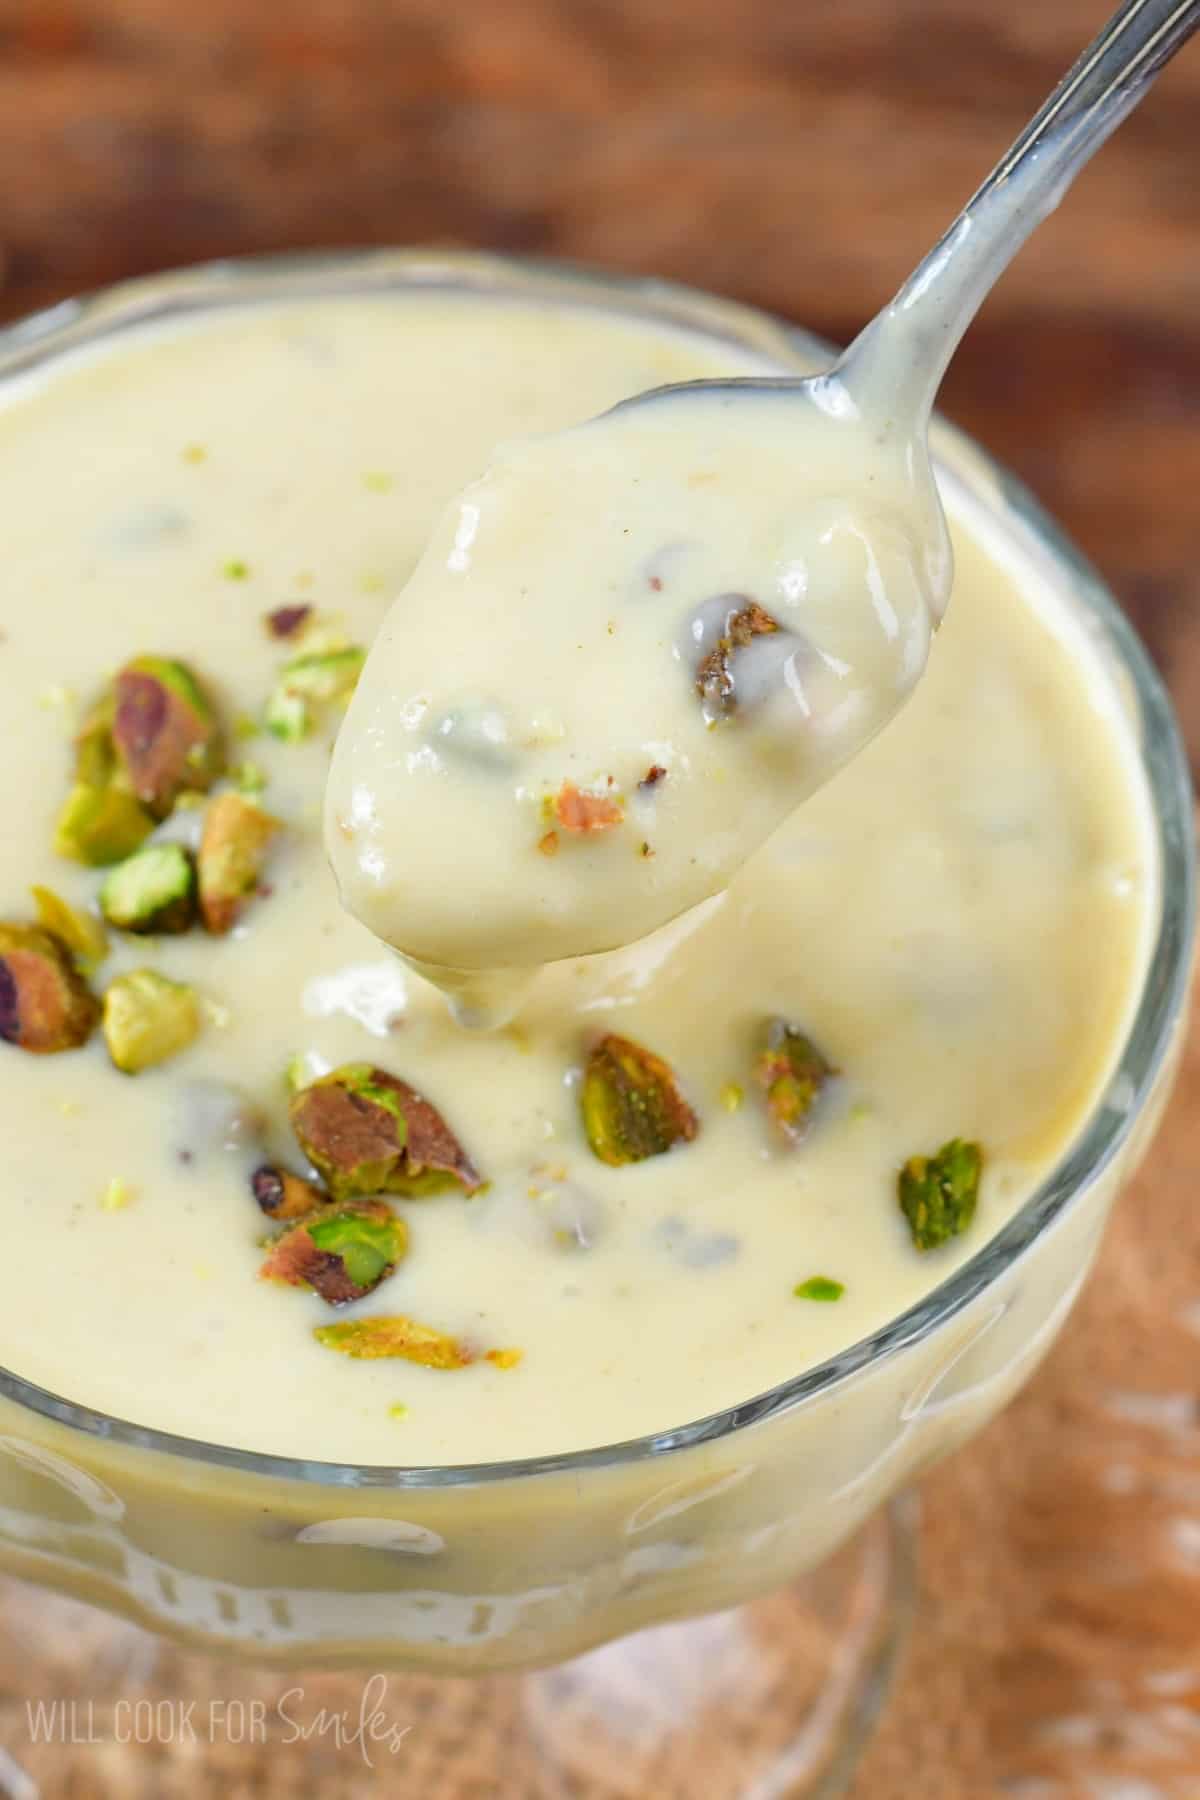 Pistachio pudding in a bowl with pistachios on top and a spoon scooping some out.